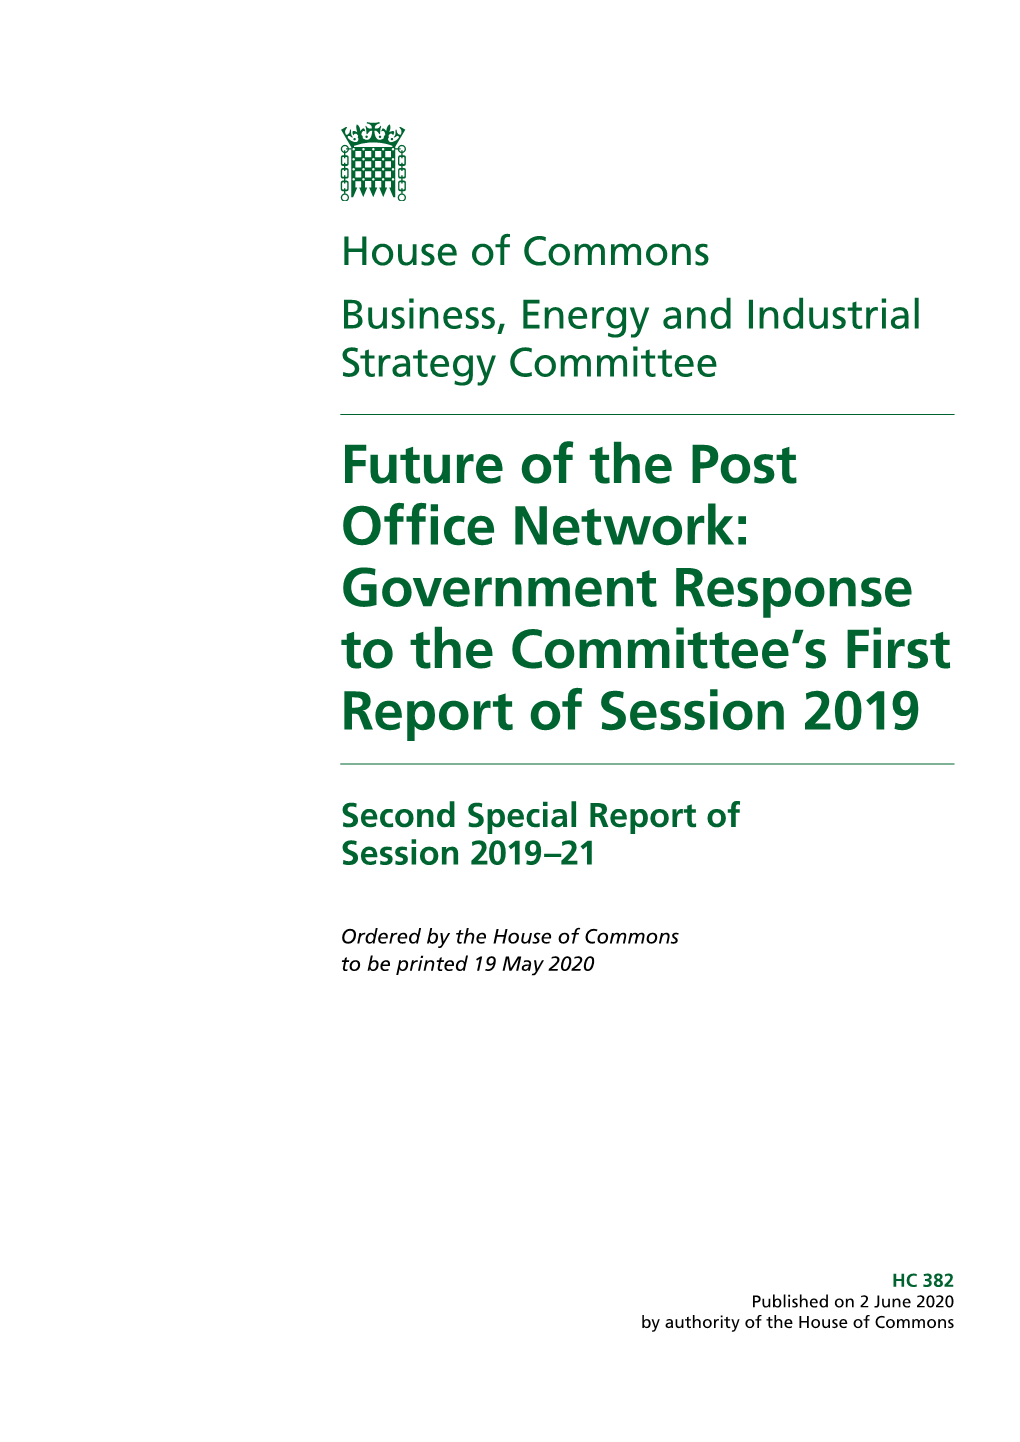 Government Response to the Committee’S First Report of Session 2019